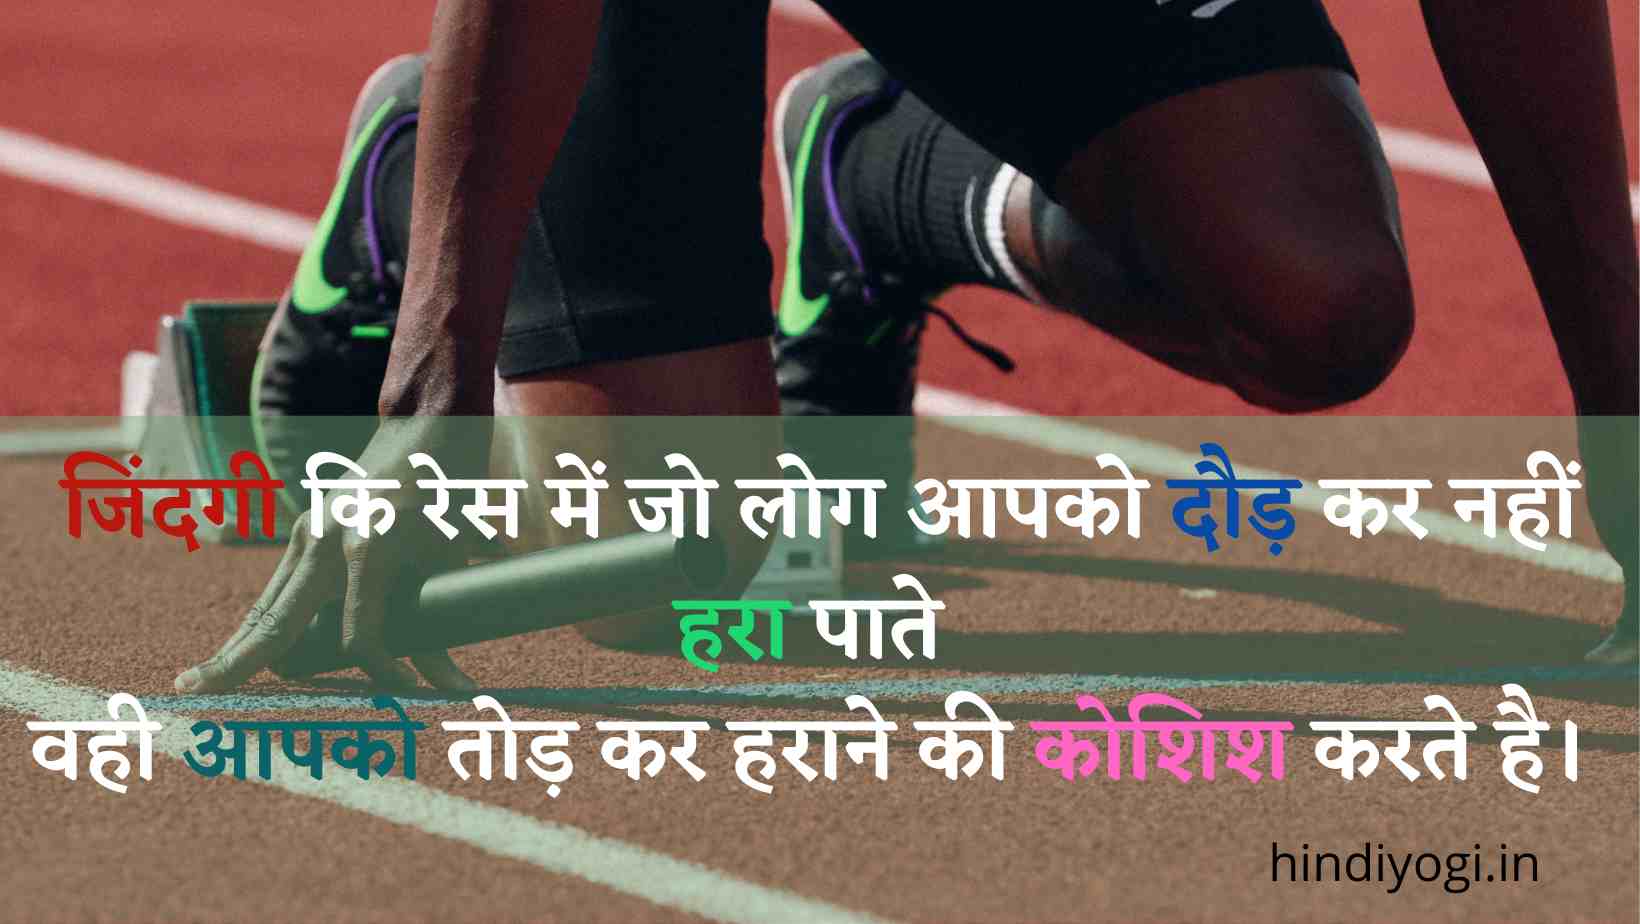 Best motivational quotes in hindi